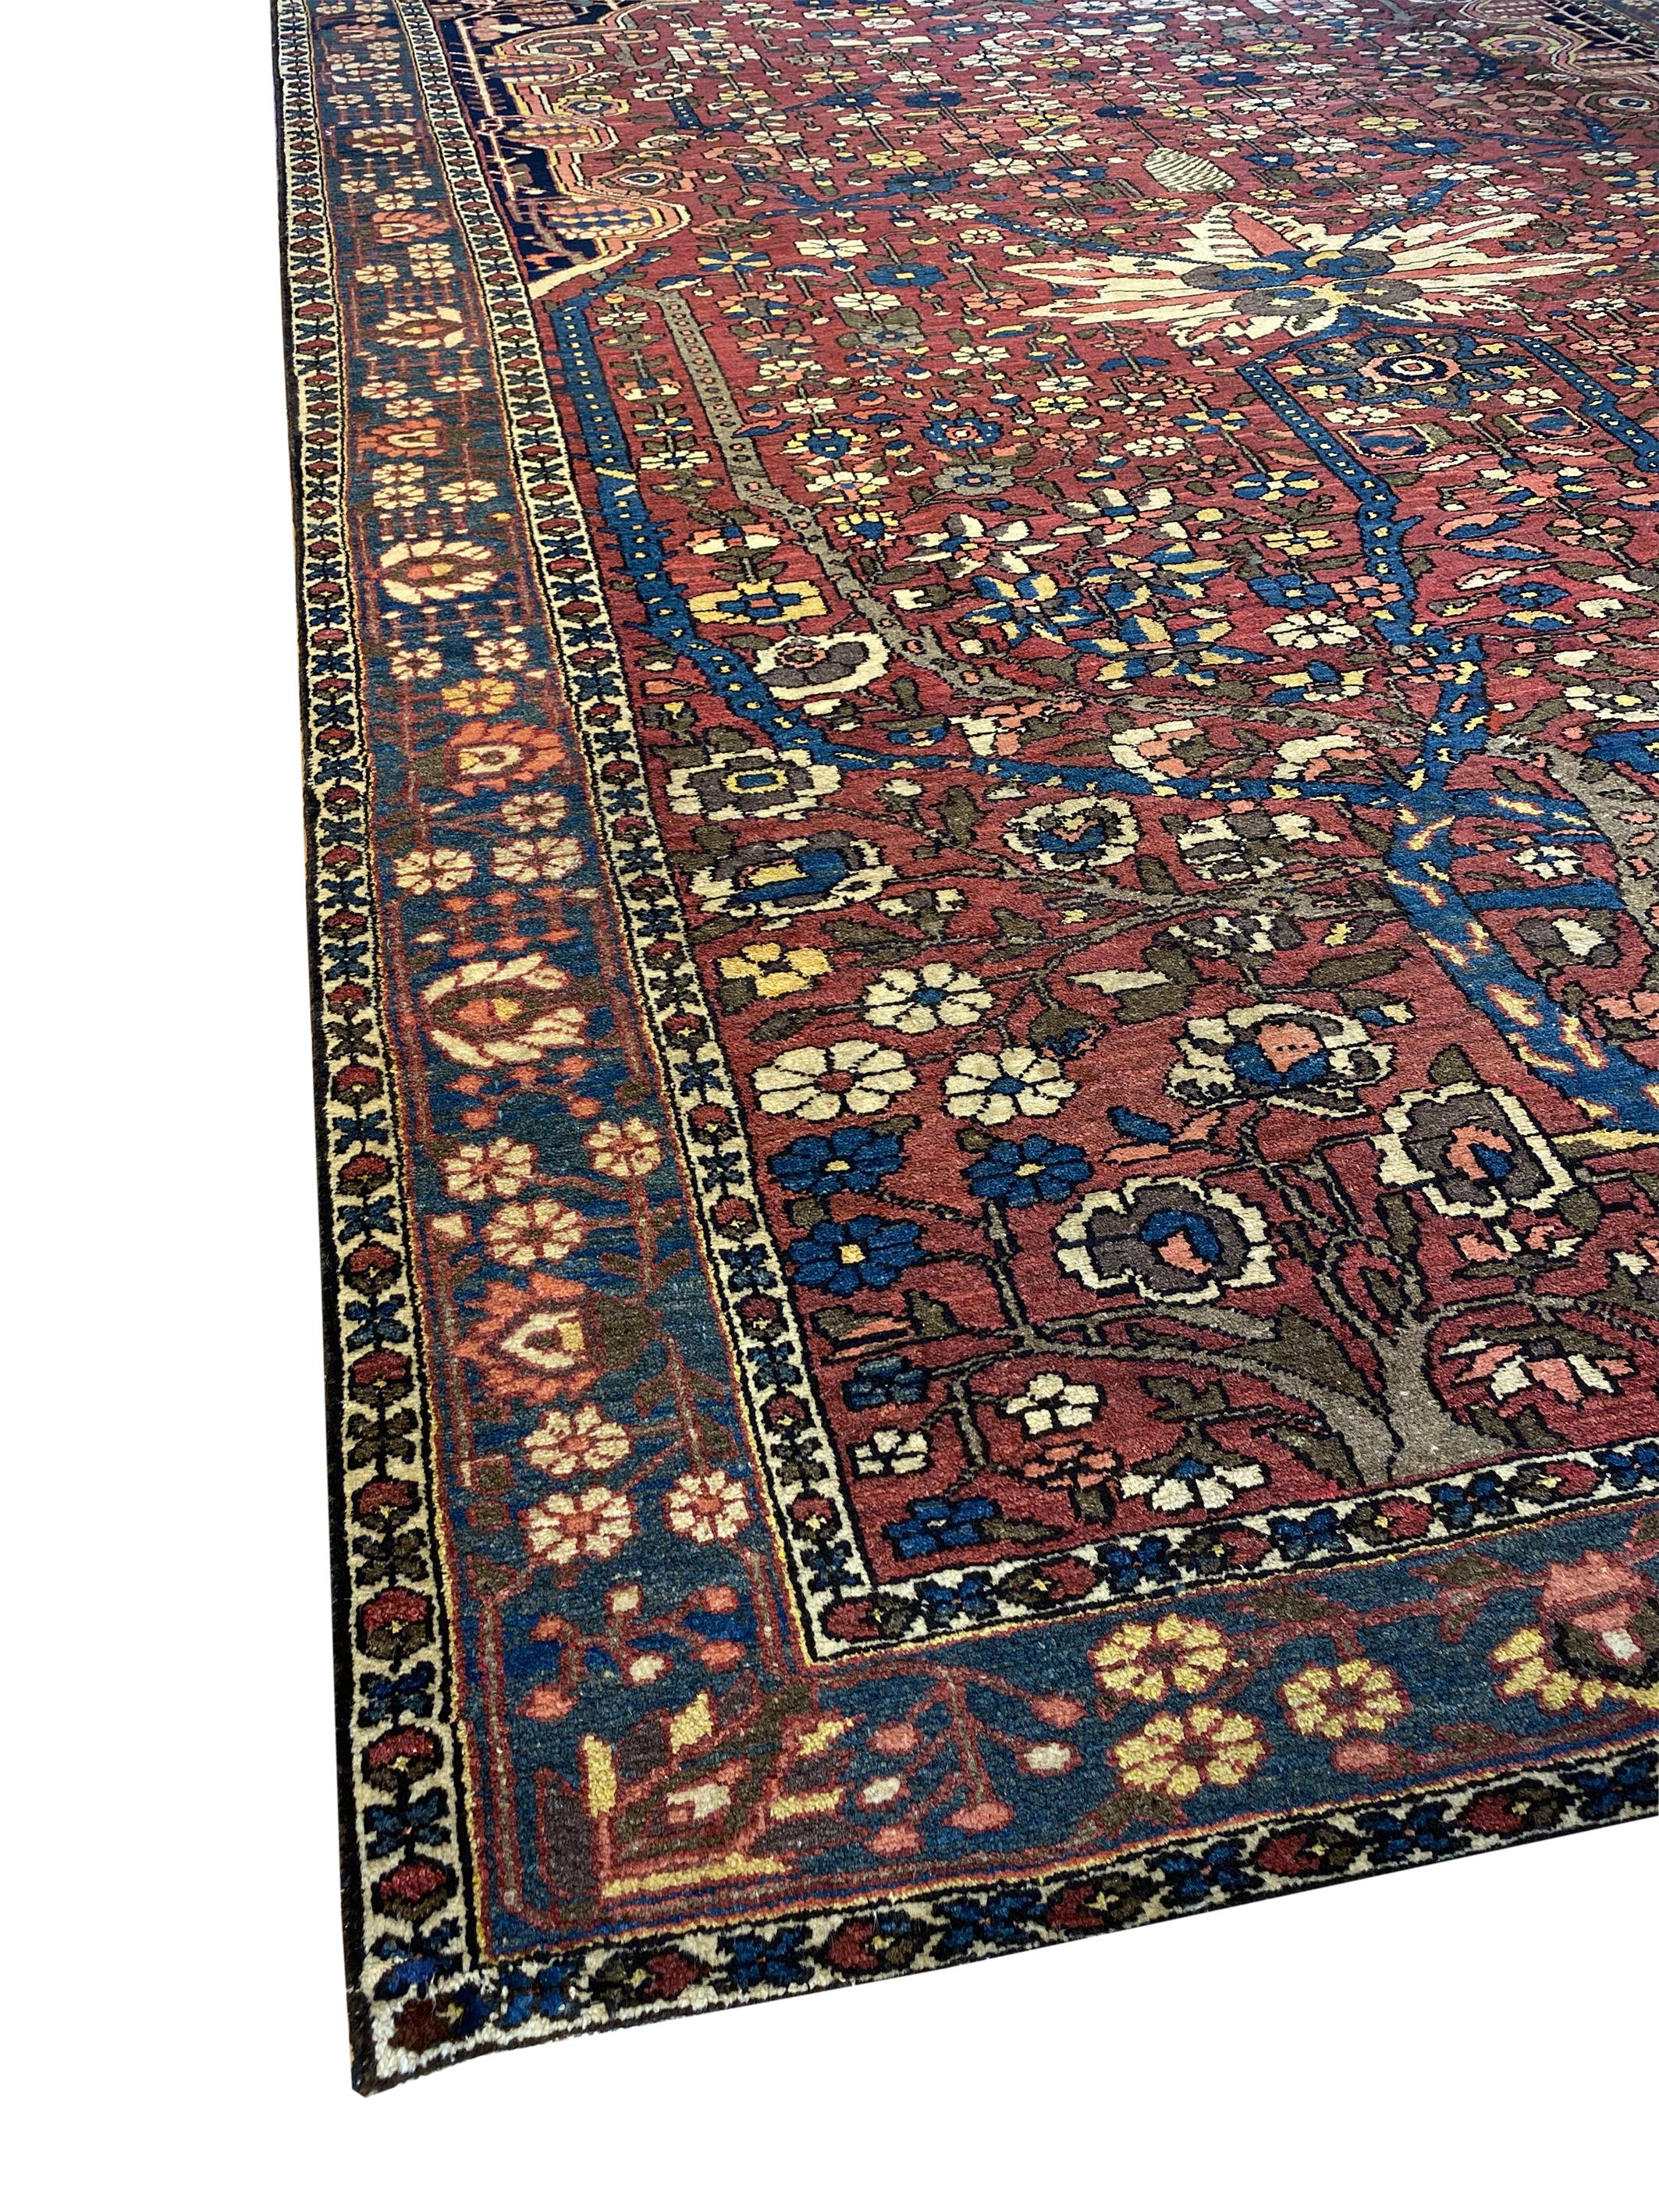 Bakhtiari rugs are among the most durable and have a vast array of designs among Persian tribal rugs. Bakhtiar region has numerous tribes with each tribe having its own technique of weave. Their antique rugs were almost exclusively woven for their